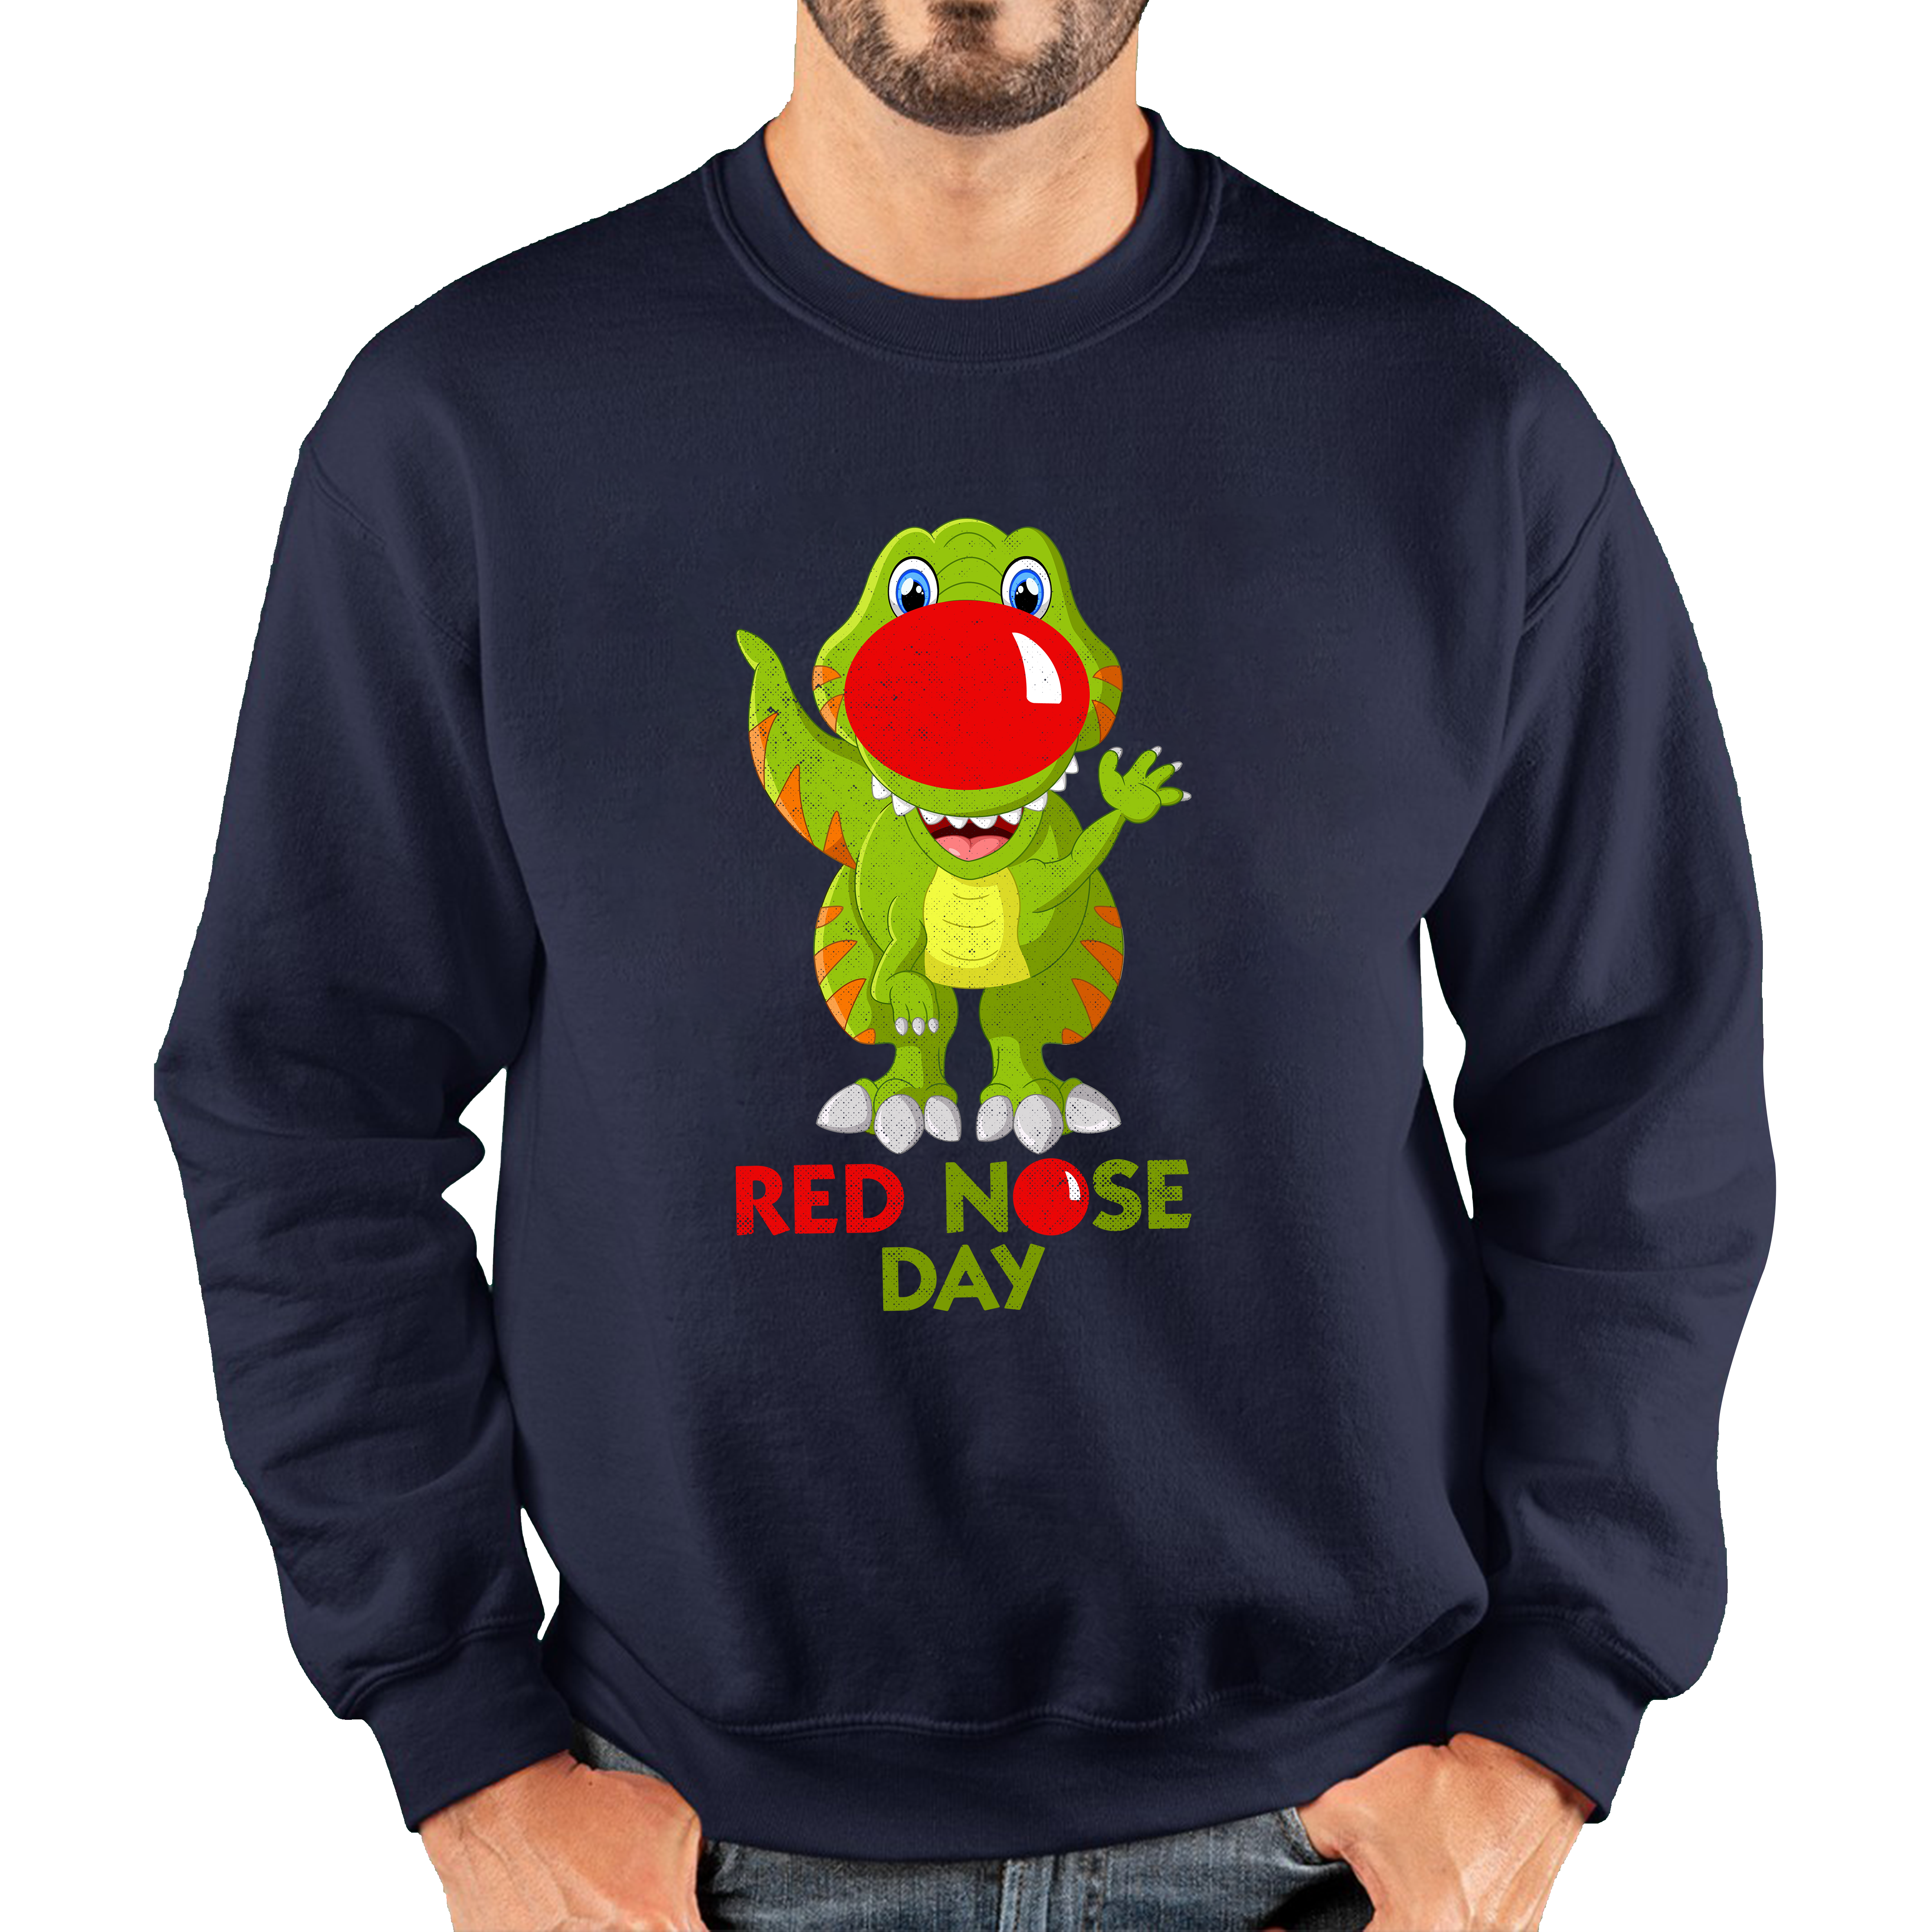 Funny Dinosaur Red Nose Day Adult Sweatshirt. 50% Goes To Charity